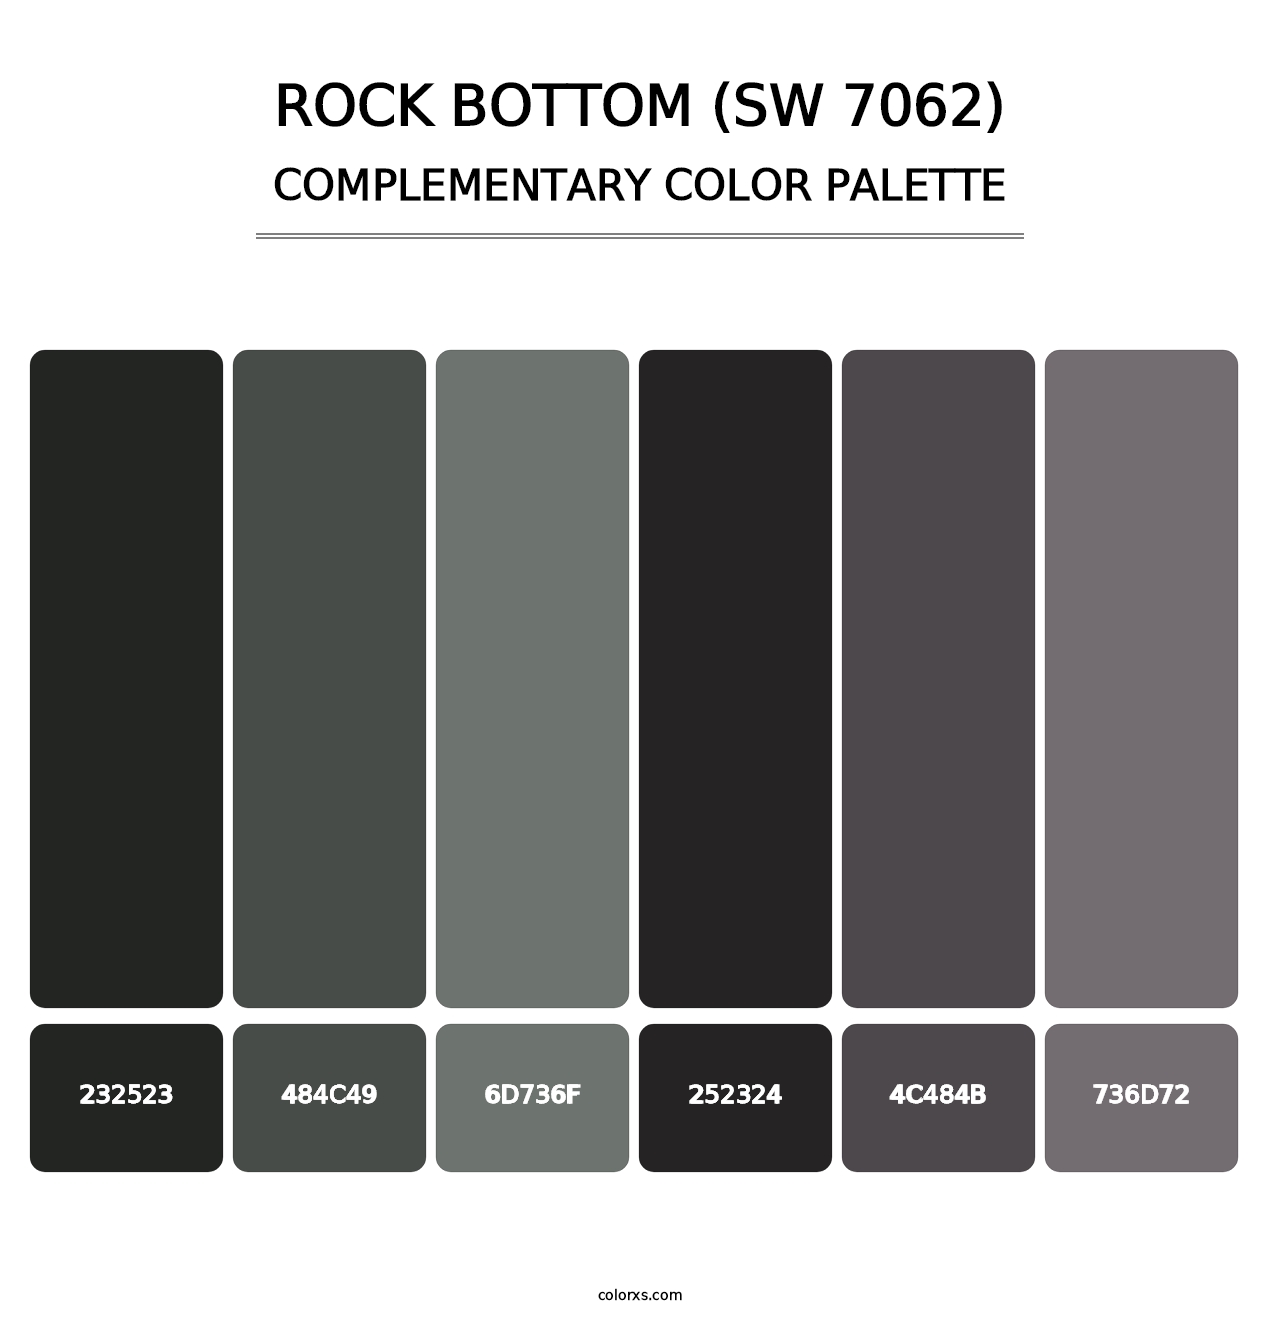 Rock Bottom (SW 7062) - Complementary Color Palette